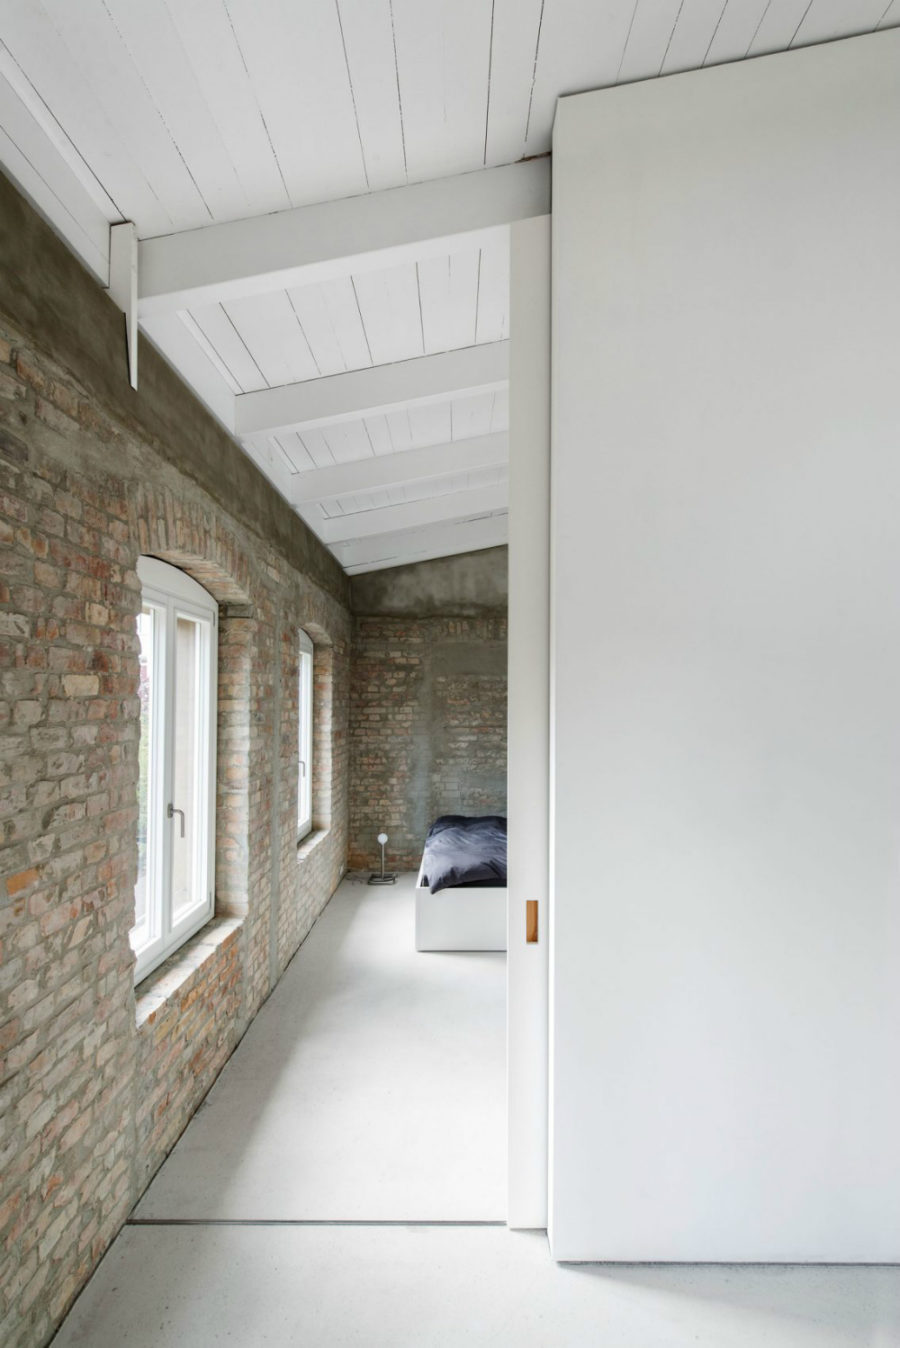 Bedroom has the same exposed brick walls